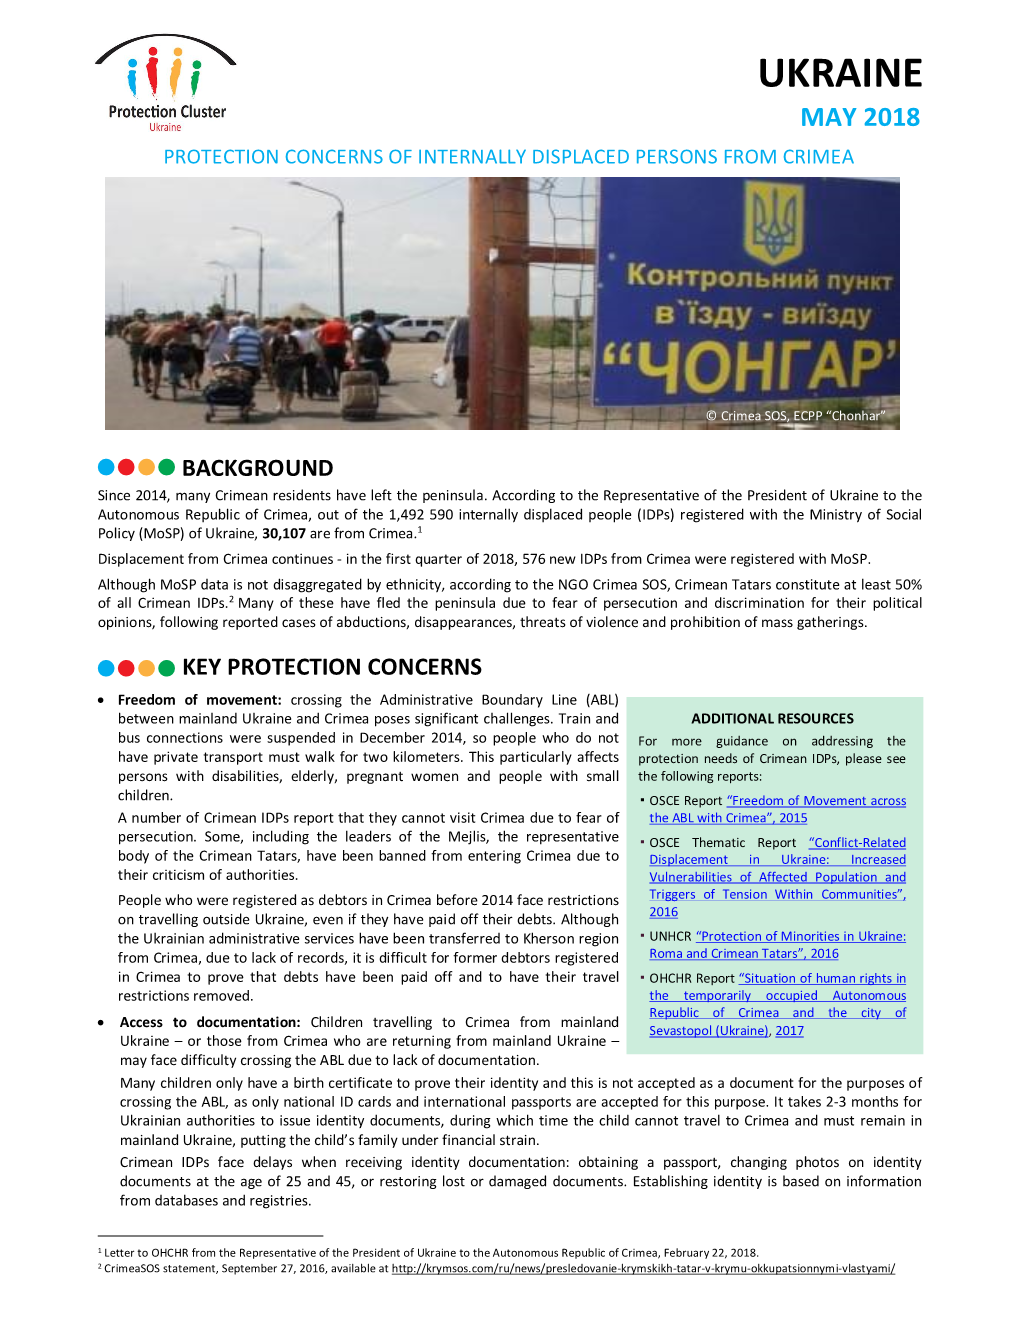 Ukraine May 2018 Protection Concerns of Internally Displaced Persons from Crimea